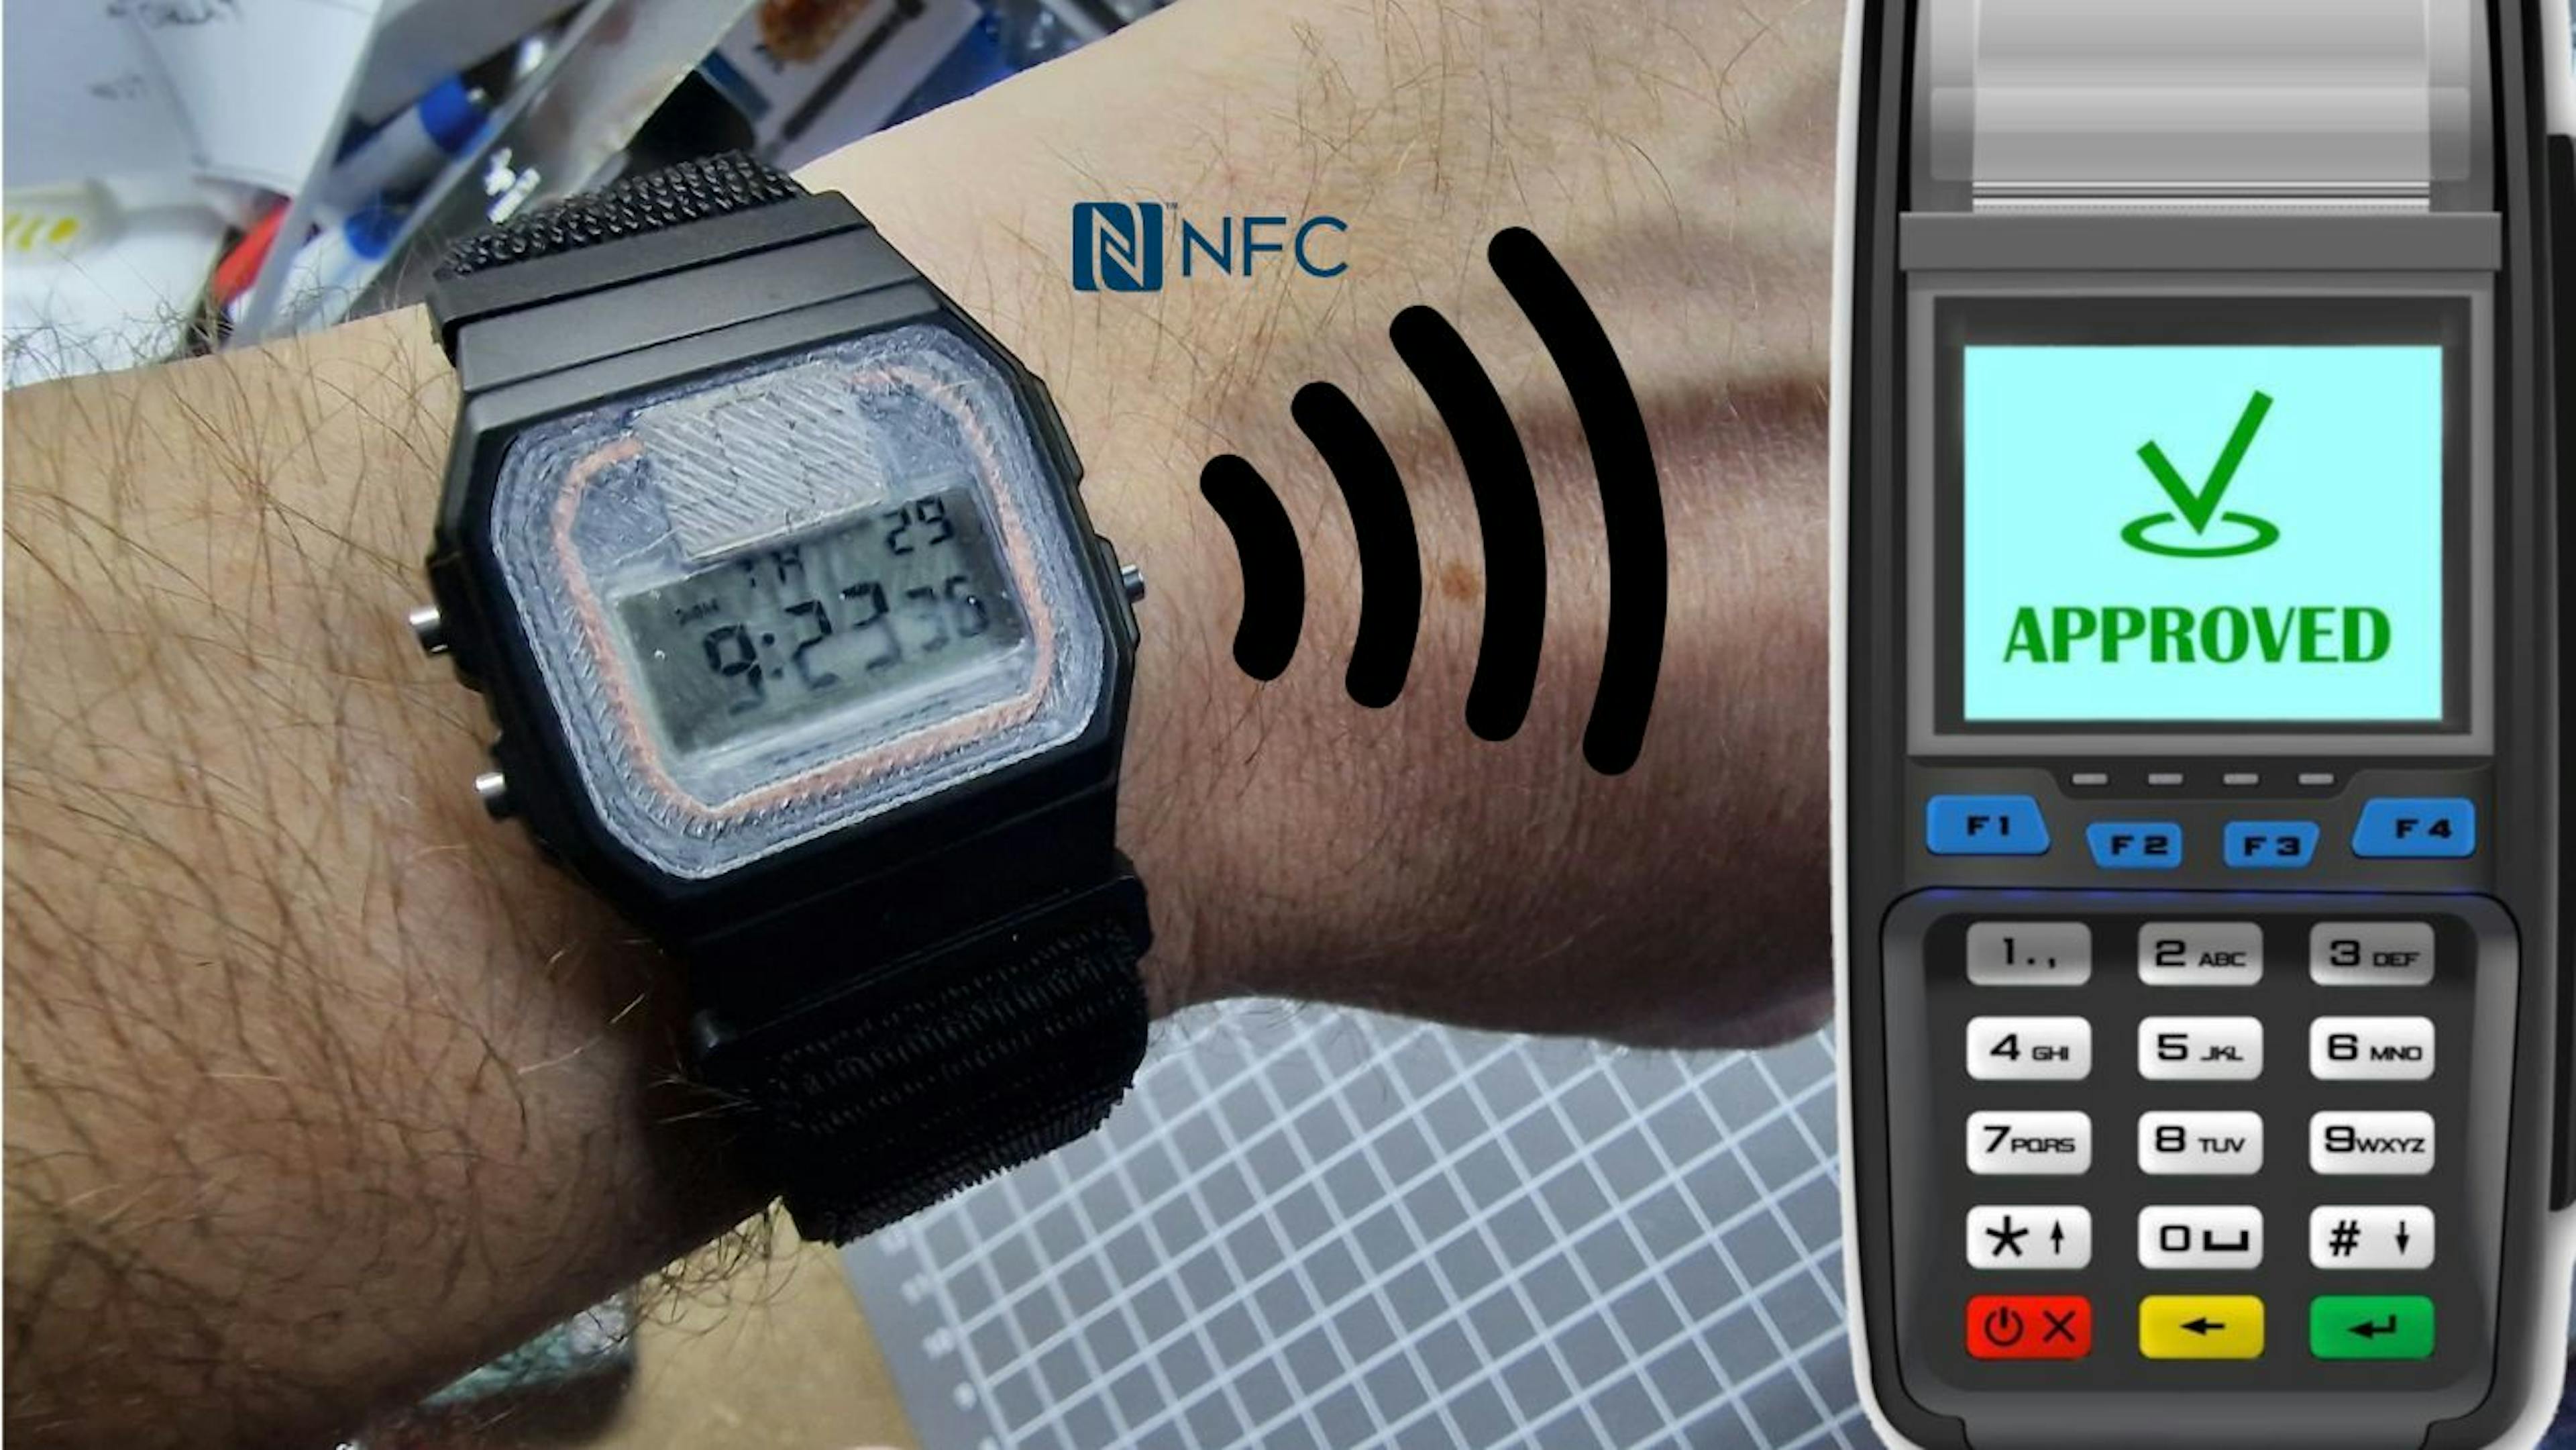 featured image - How I Hacked and Turned My CASIO F-91W Into a Contactless Payment Device